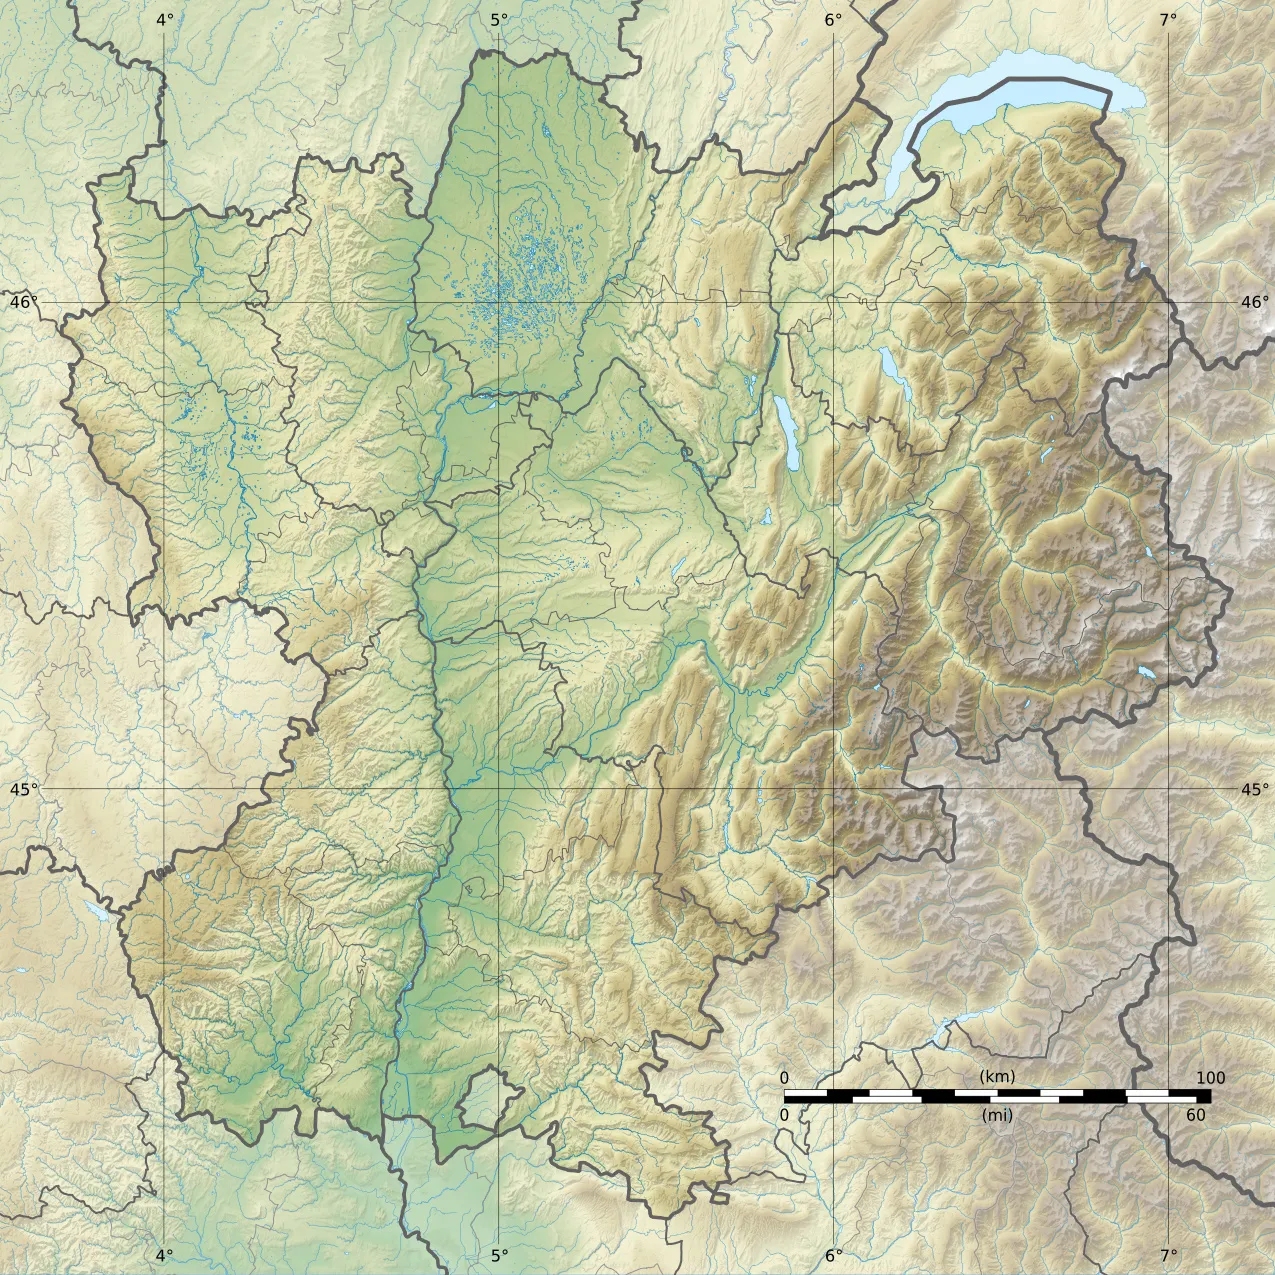 Photo showing: Blank physical map of the region of Rhône-Alpes, France, for geo-location purpose, with distinct boundaries for regions, departments and arrondissements.